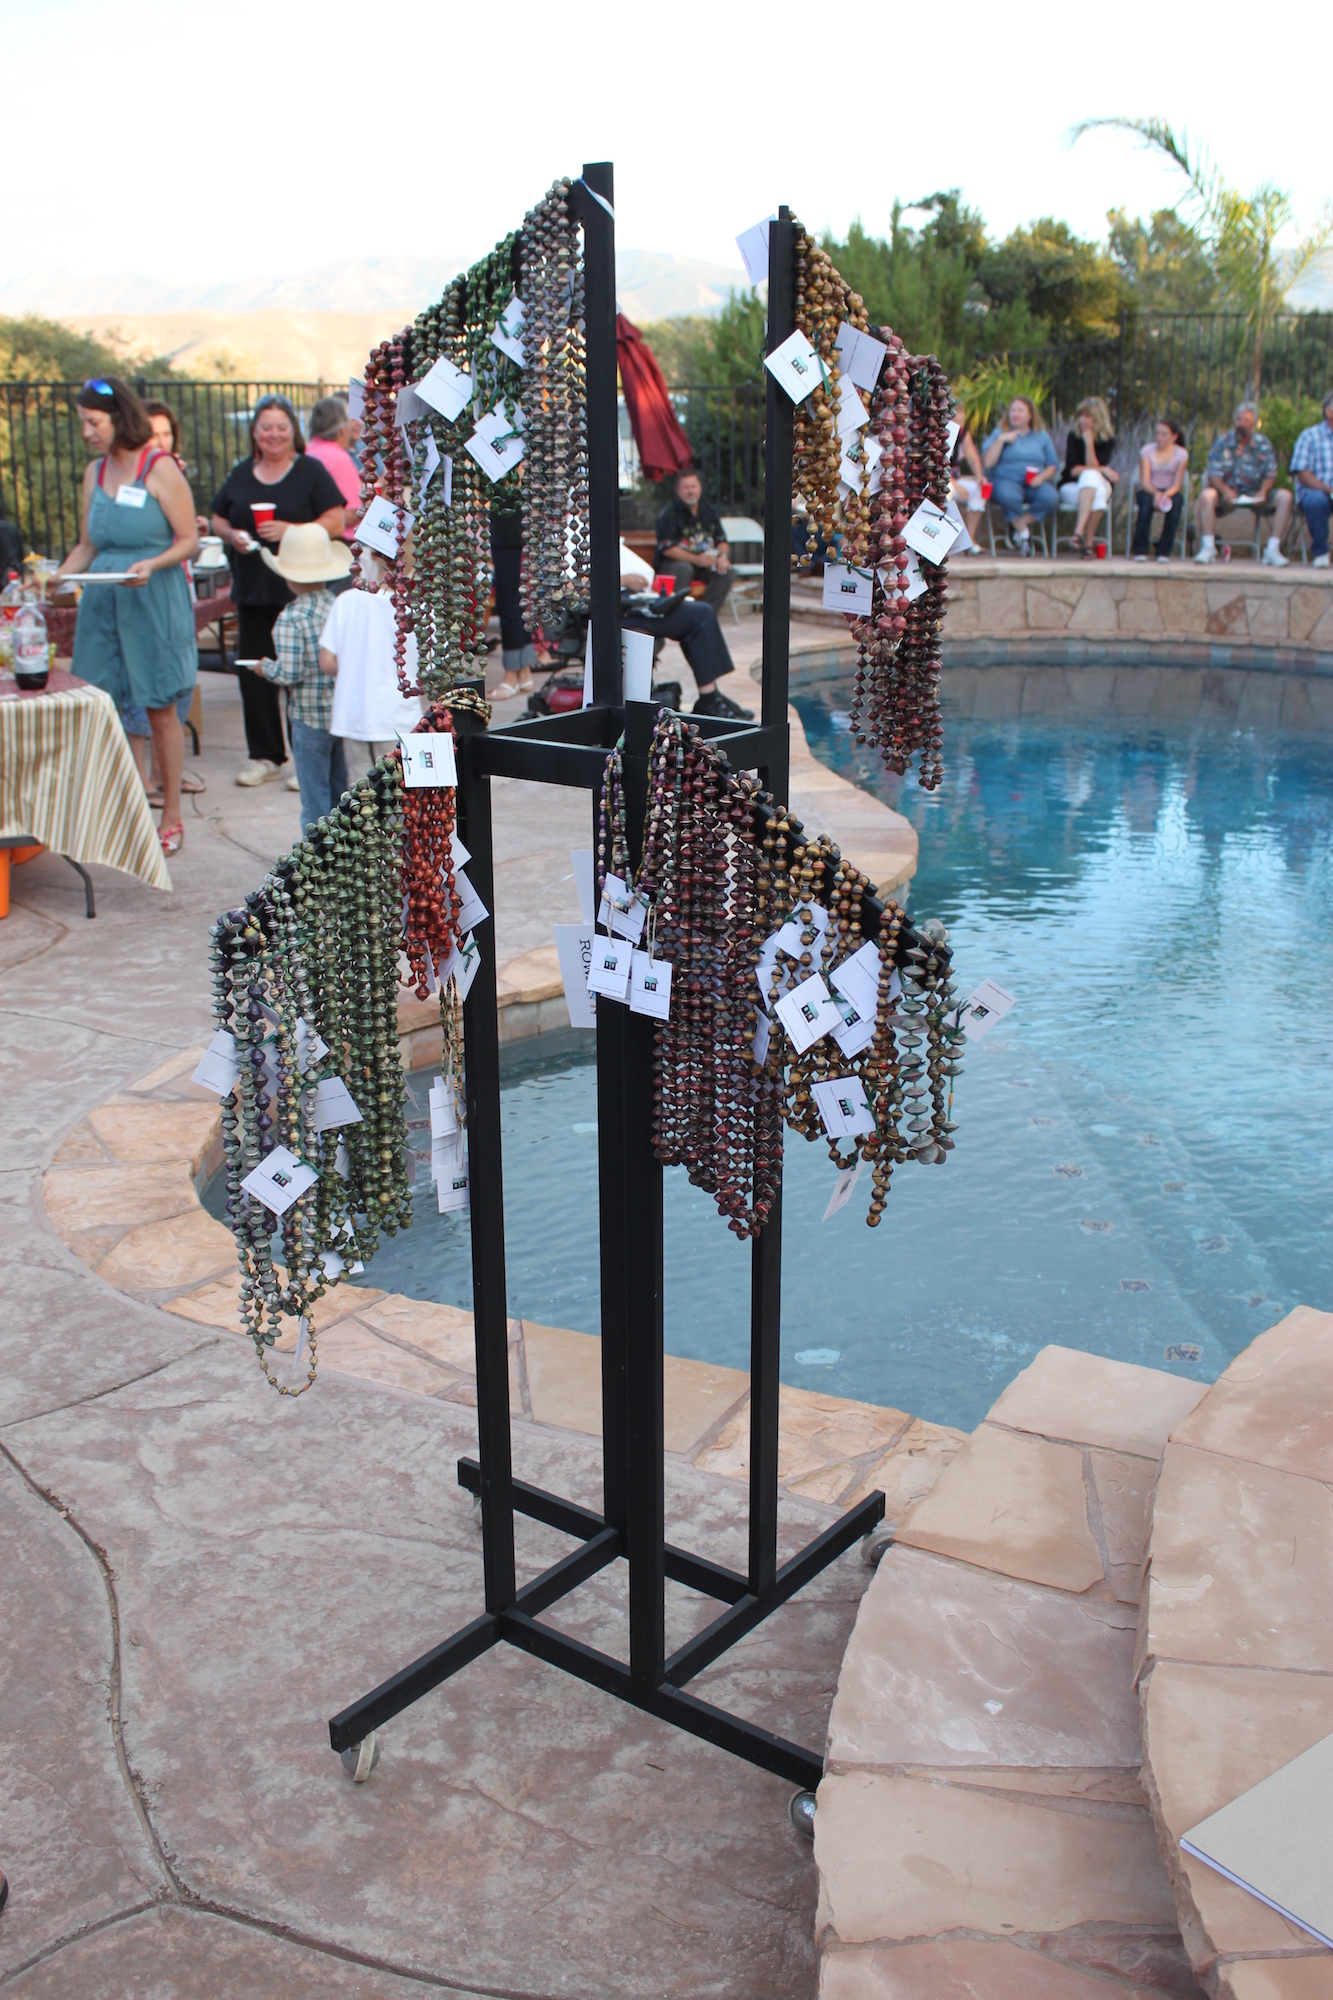 A stand with hanging beaded necklaces